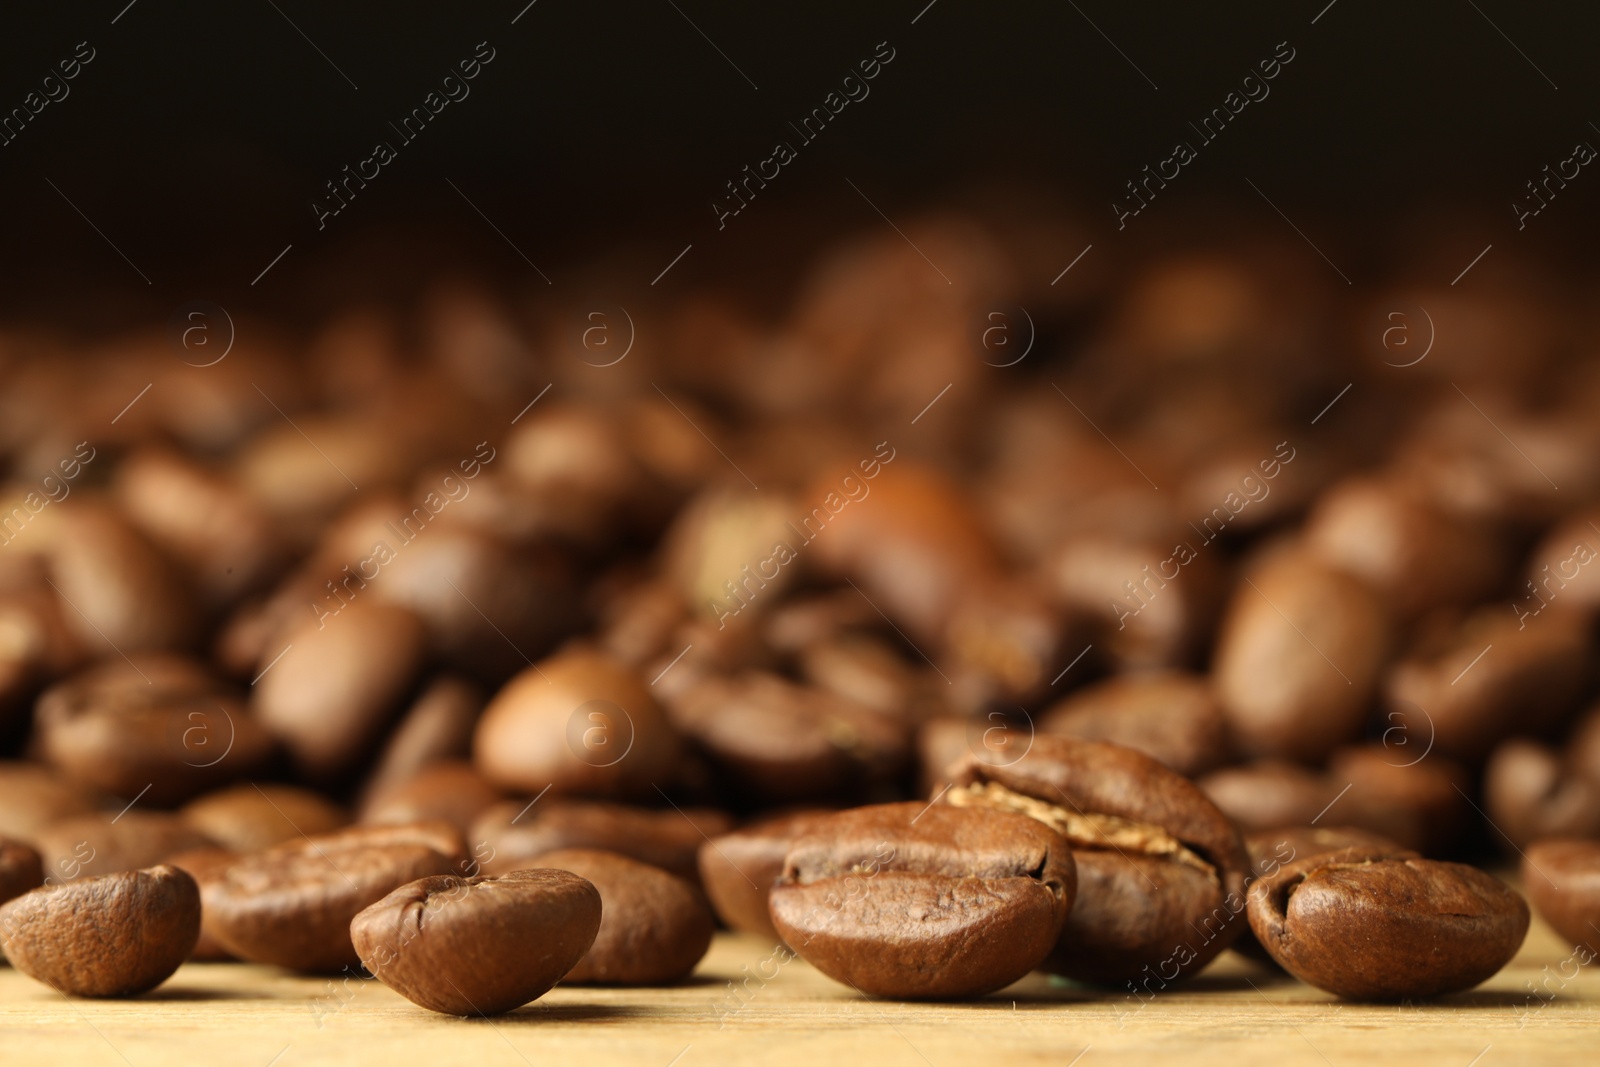 Photo of Many roasted coffee beans on wooden table, closeup